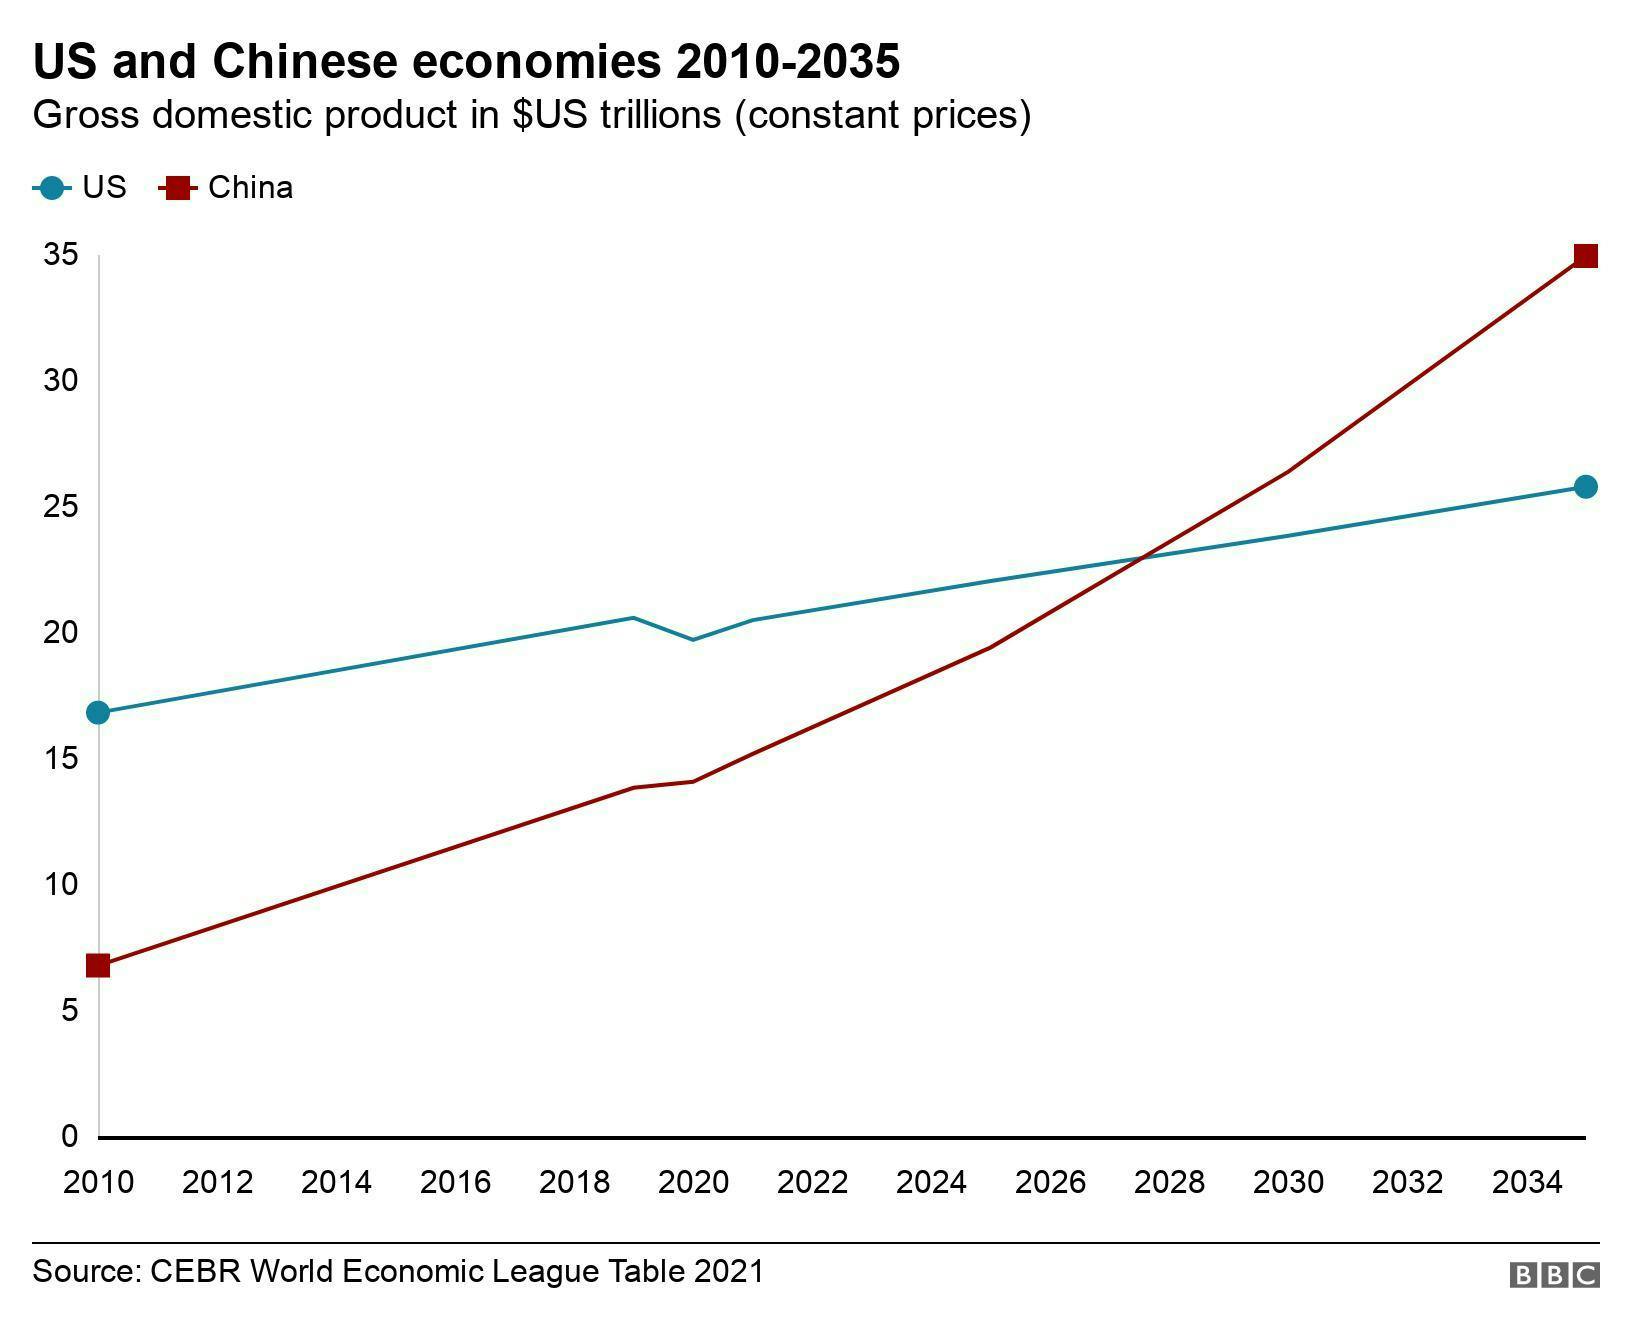 The question when China will overtake US as the world's biggest economy has been answered. The year is 2028.